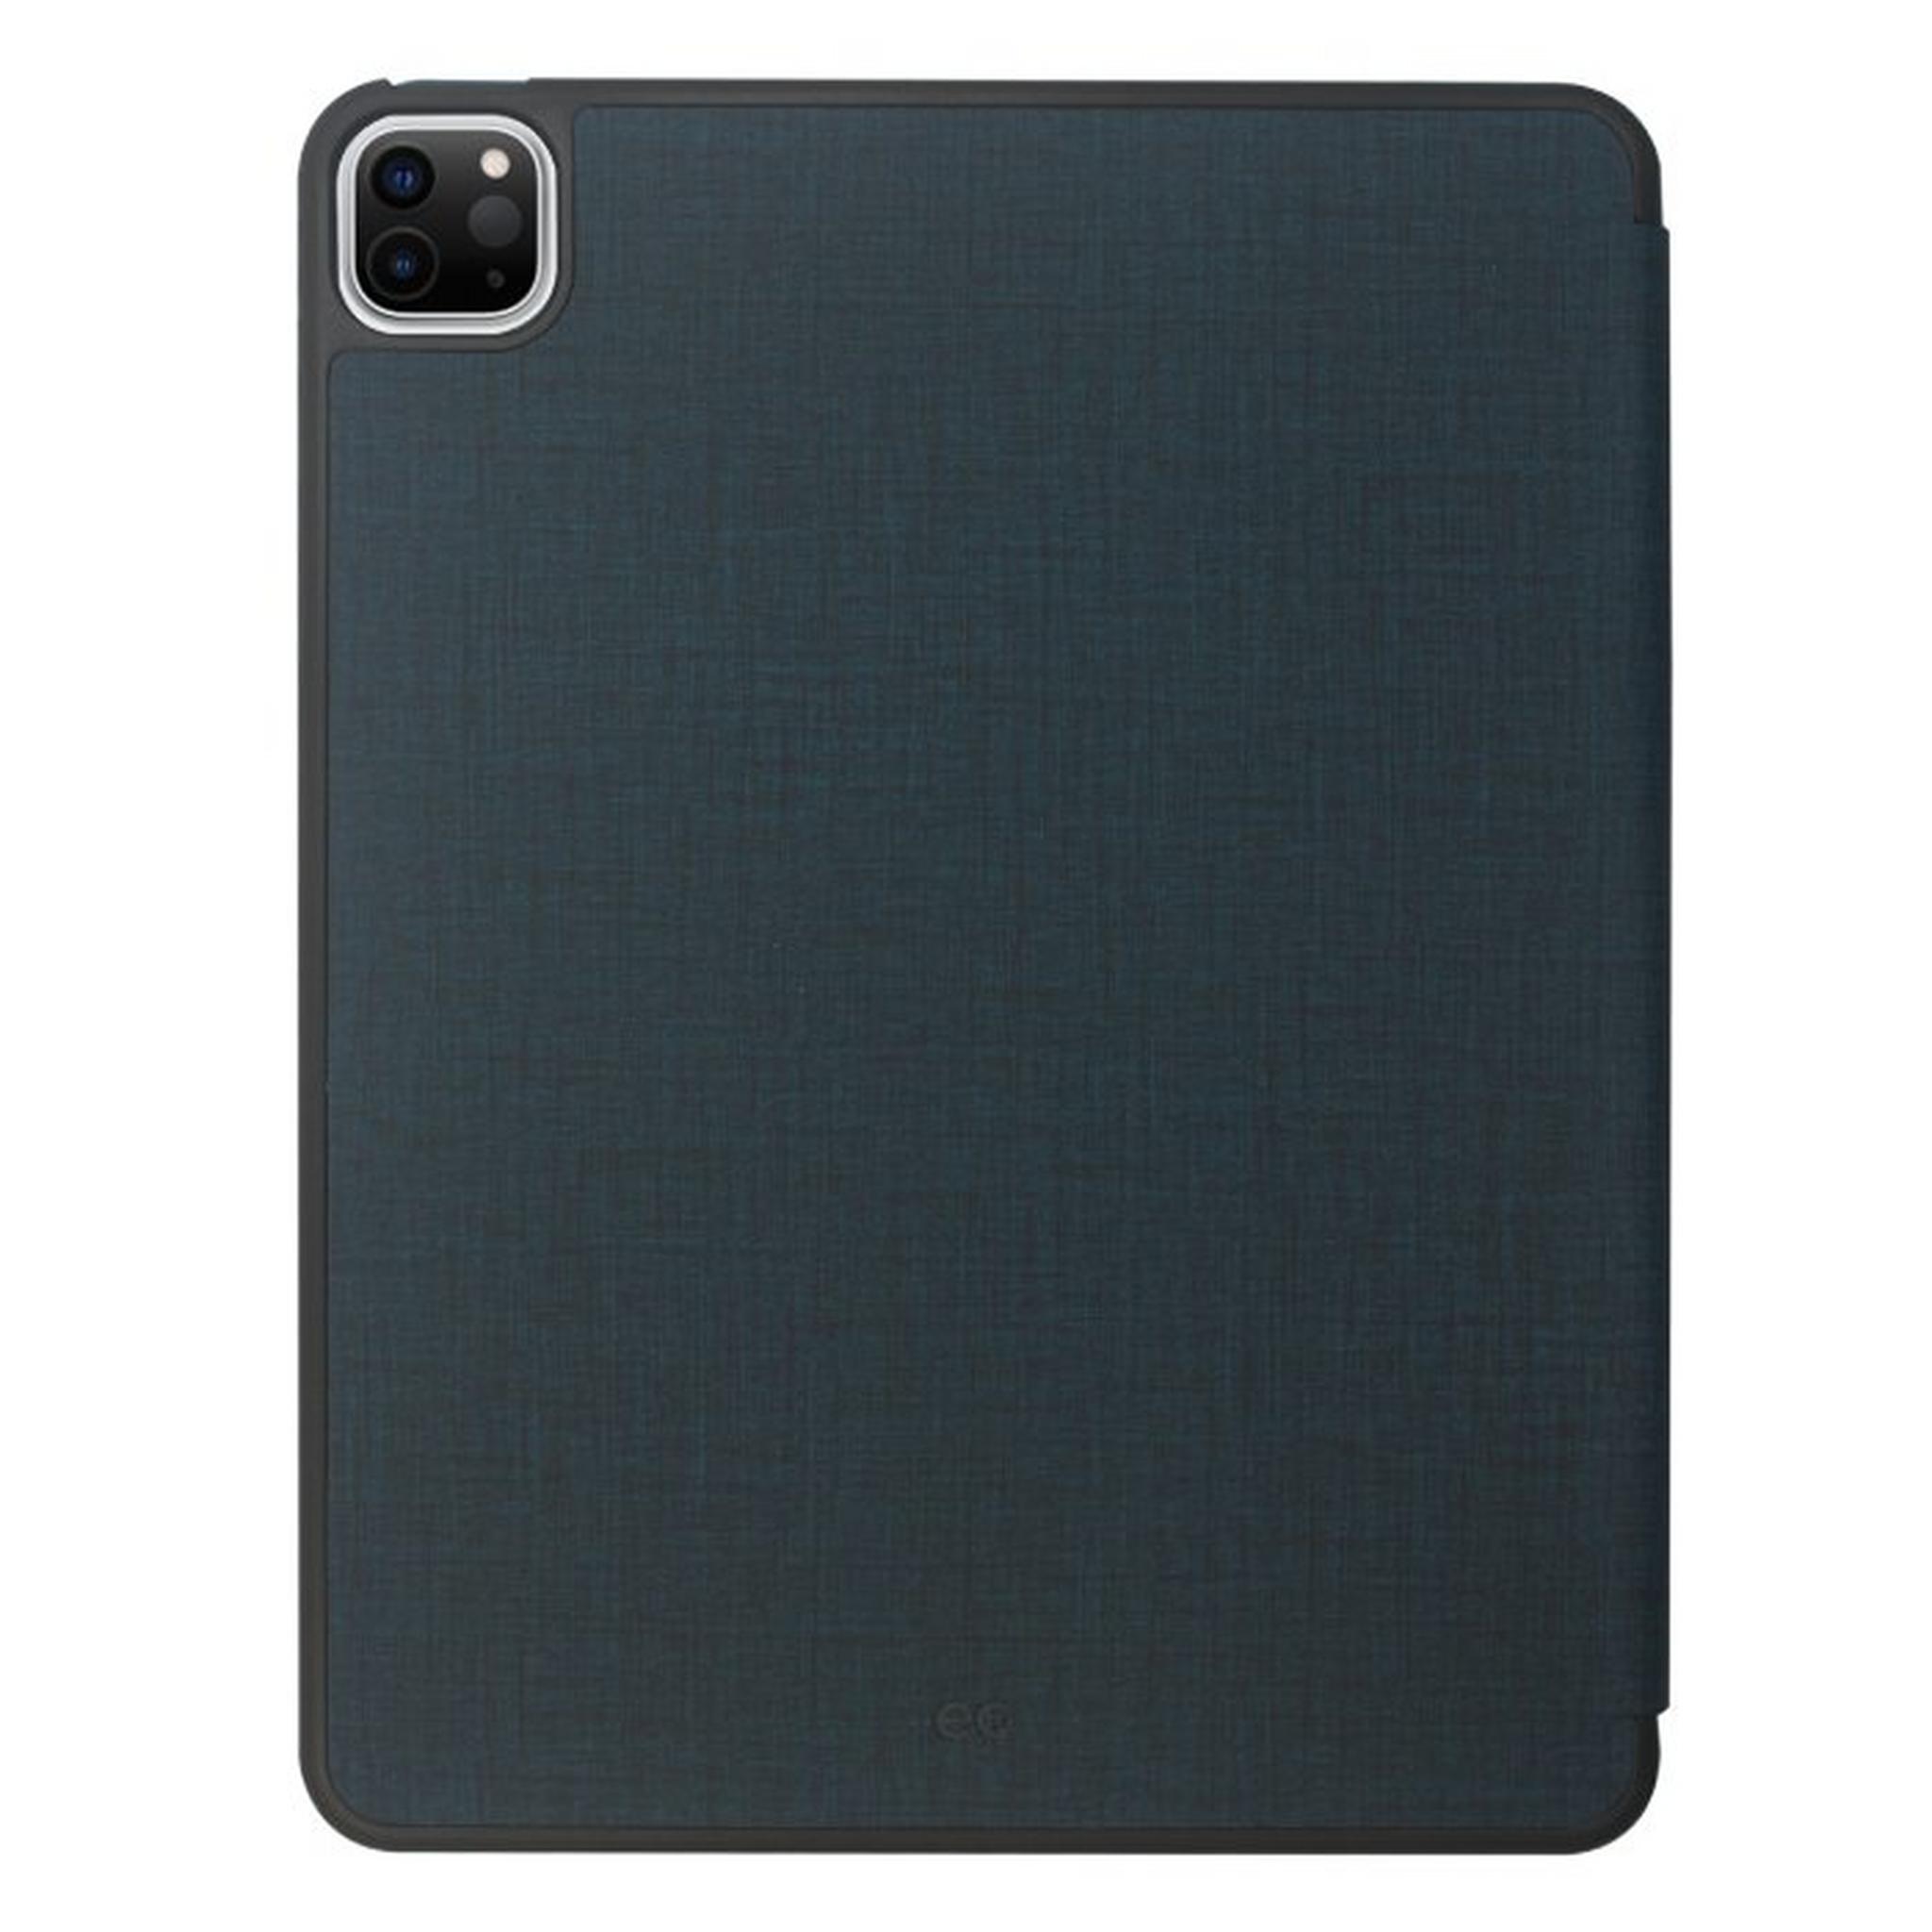 EQ Mebric Case For iPad Pro 11 inch - Navy